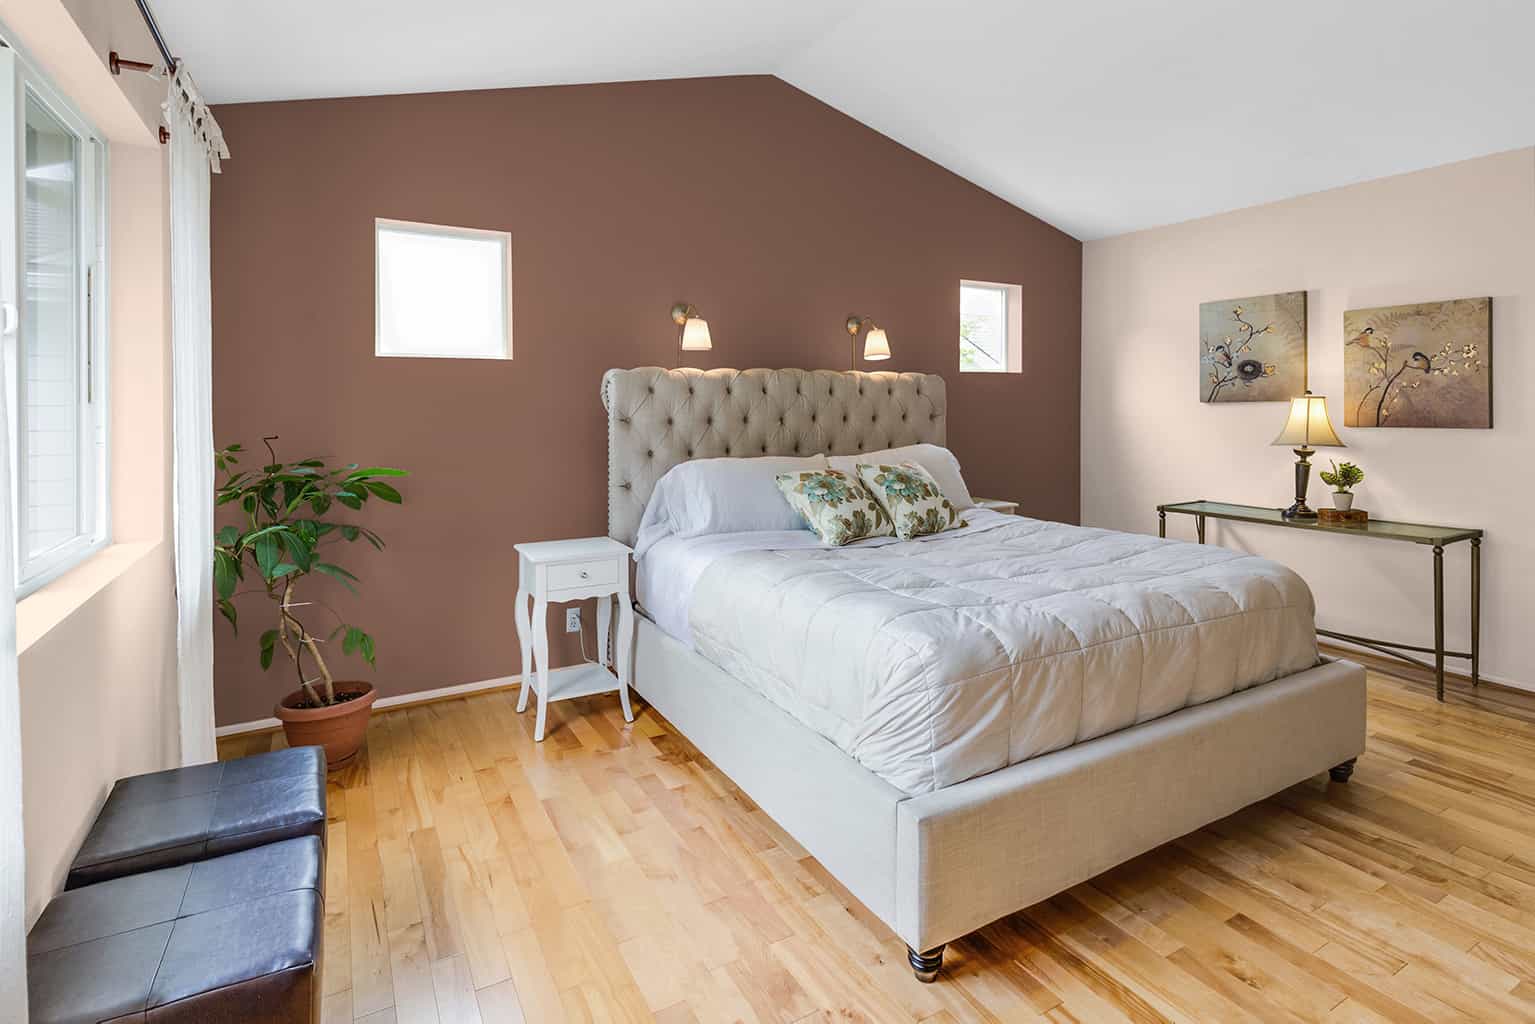 Picking A Bedroom Decor Color